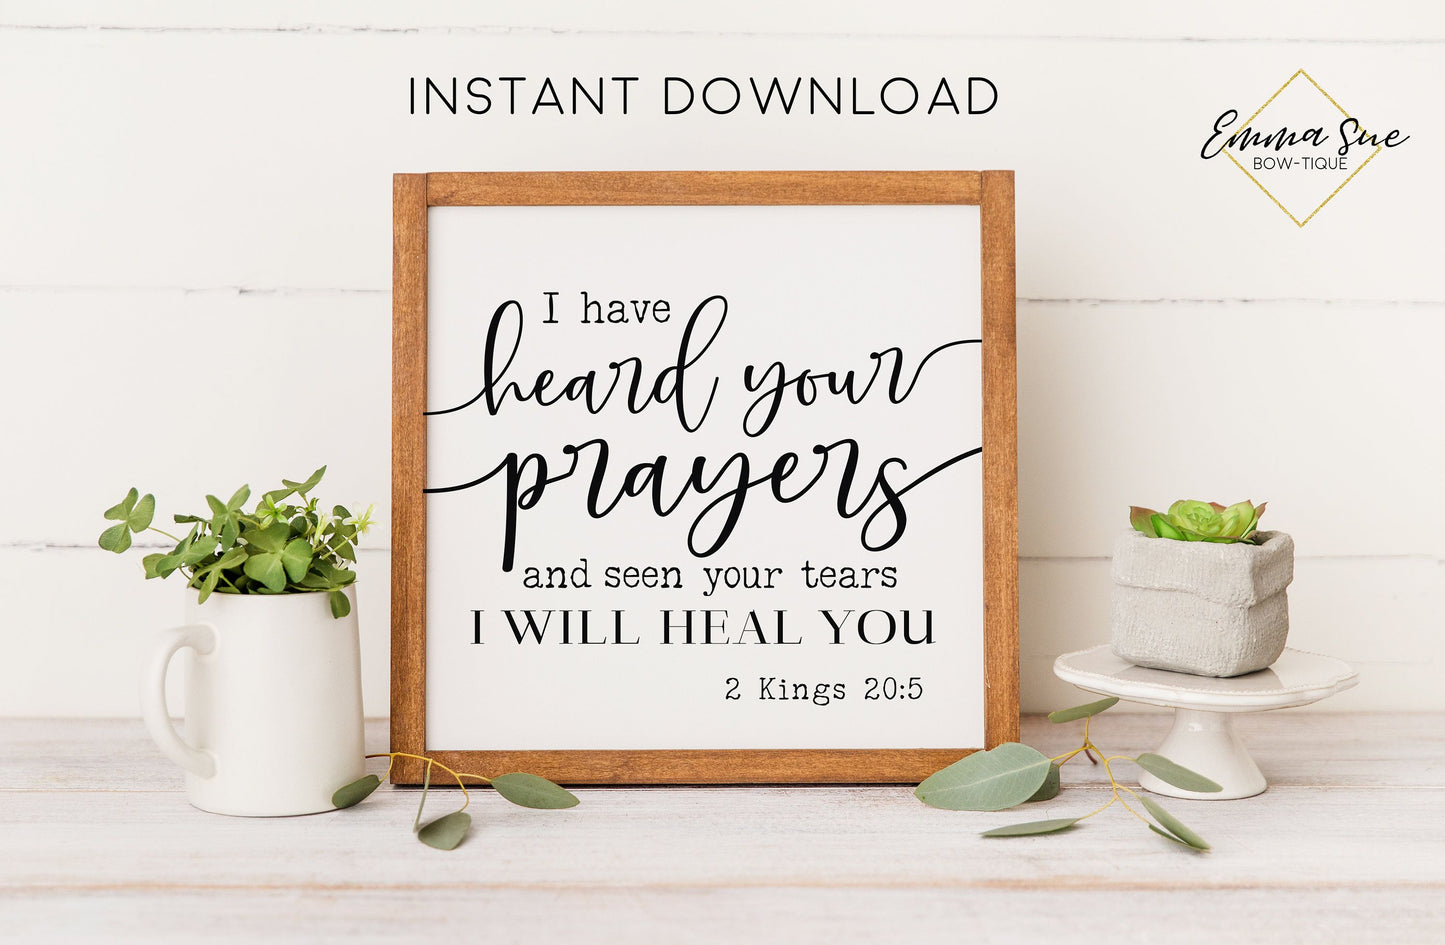 I have heard your prayers and seen your tears I will heal you 2 Kings 20:5 Bible Verse Christian Farmhouse Printable Art Sign Digital File